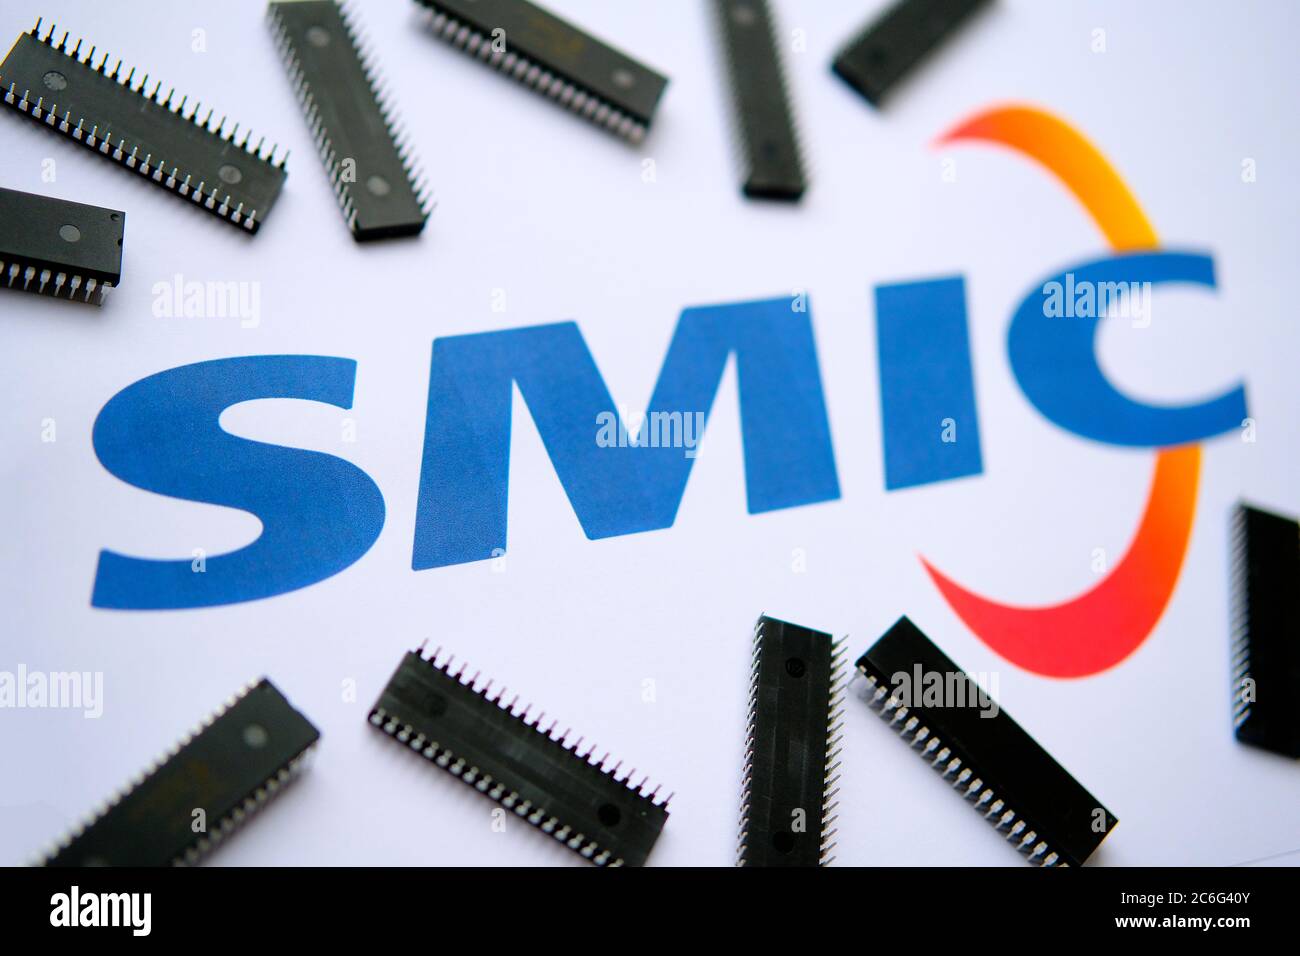 Stone / United Kingdom - July 8 2020: SMIC (Semiconductor Manufacturing International Corporation) logo on the printed document and large microchips p Stock Photo